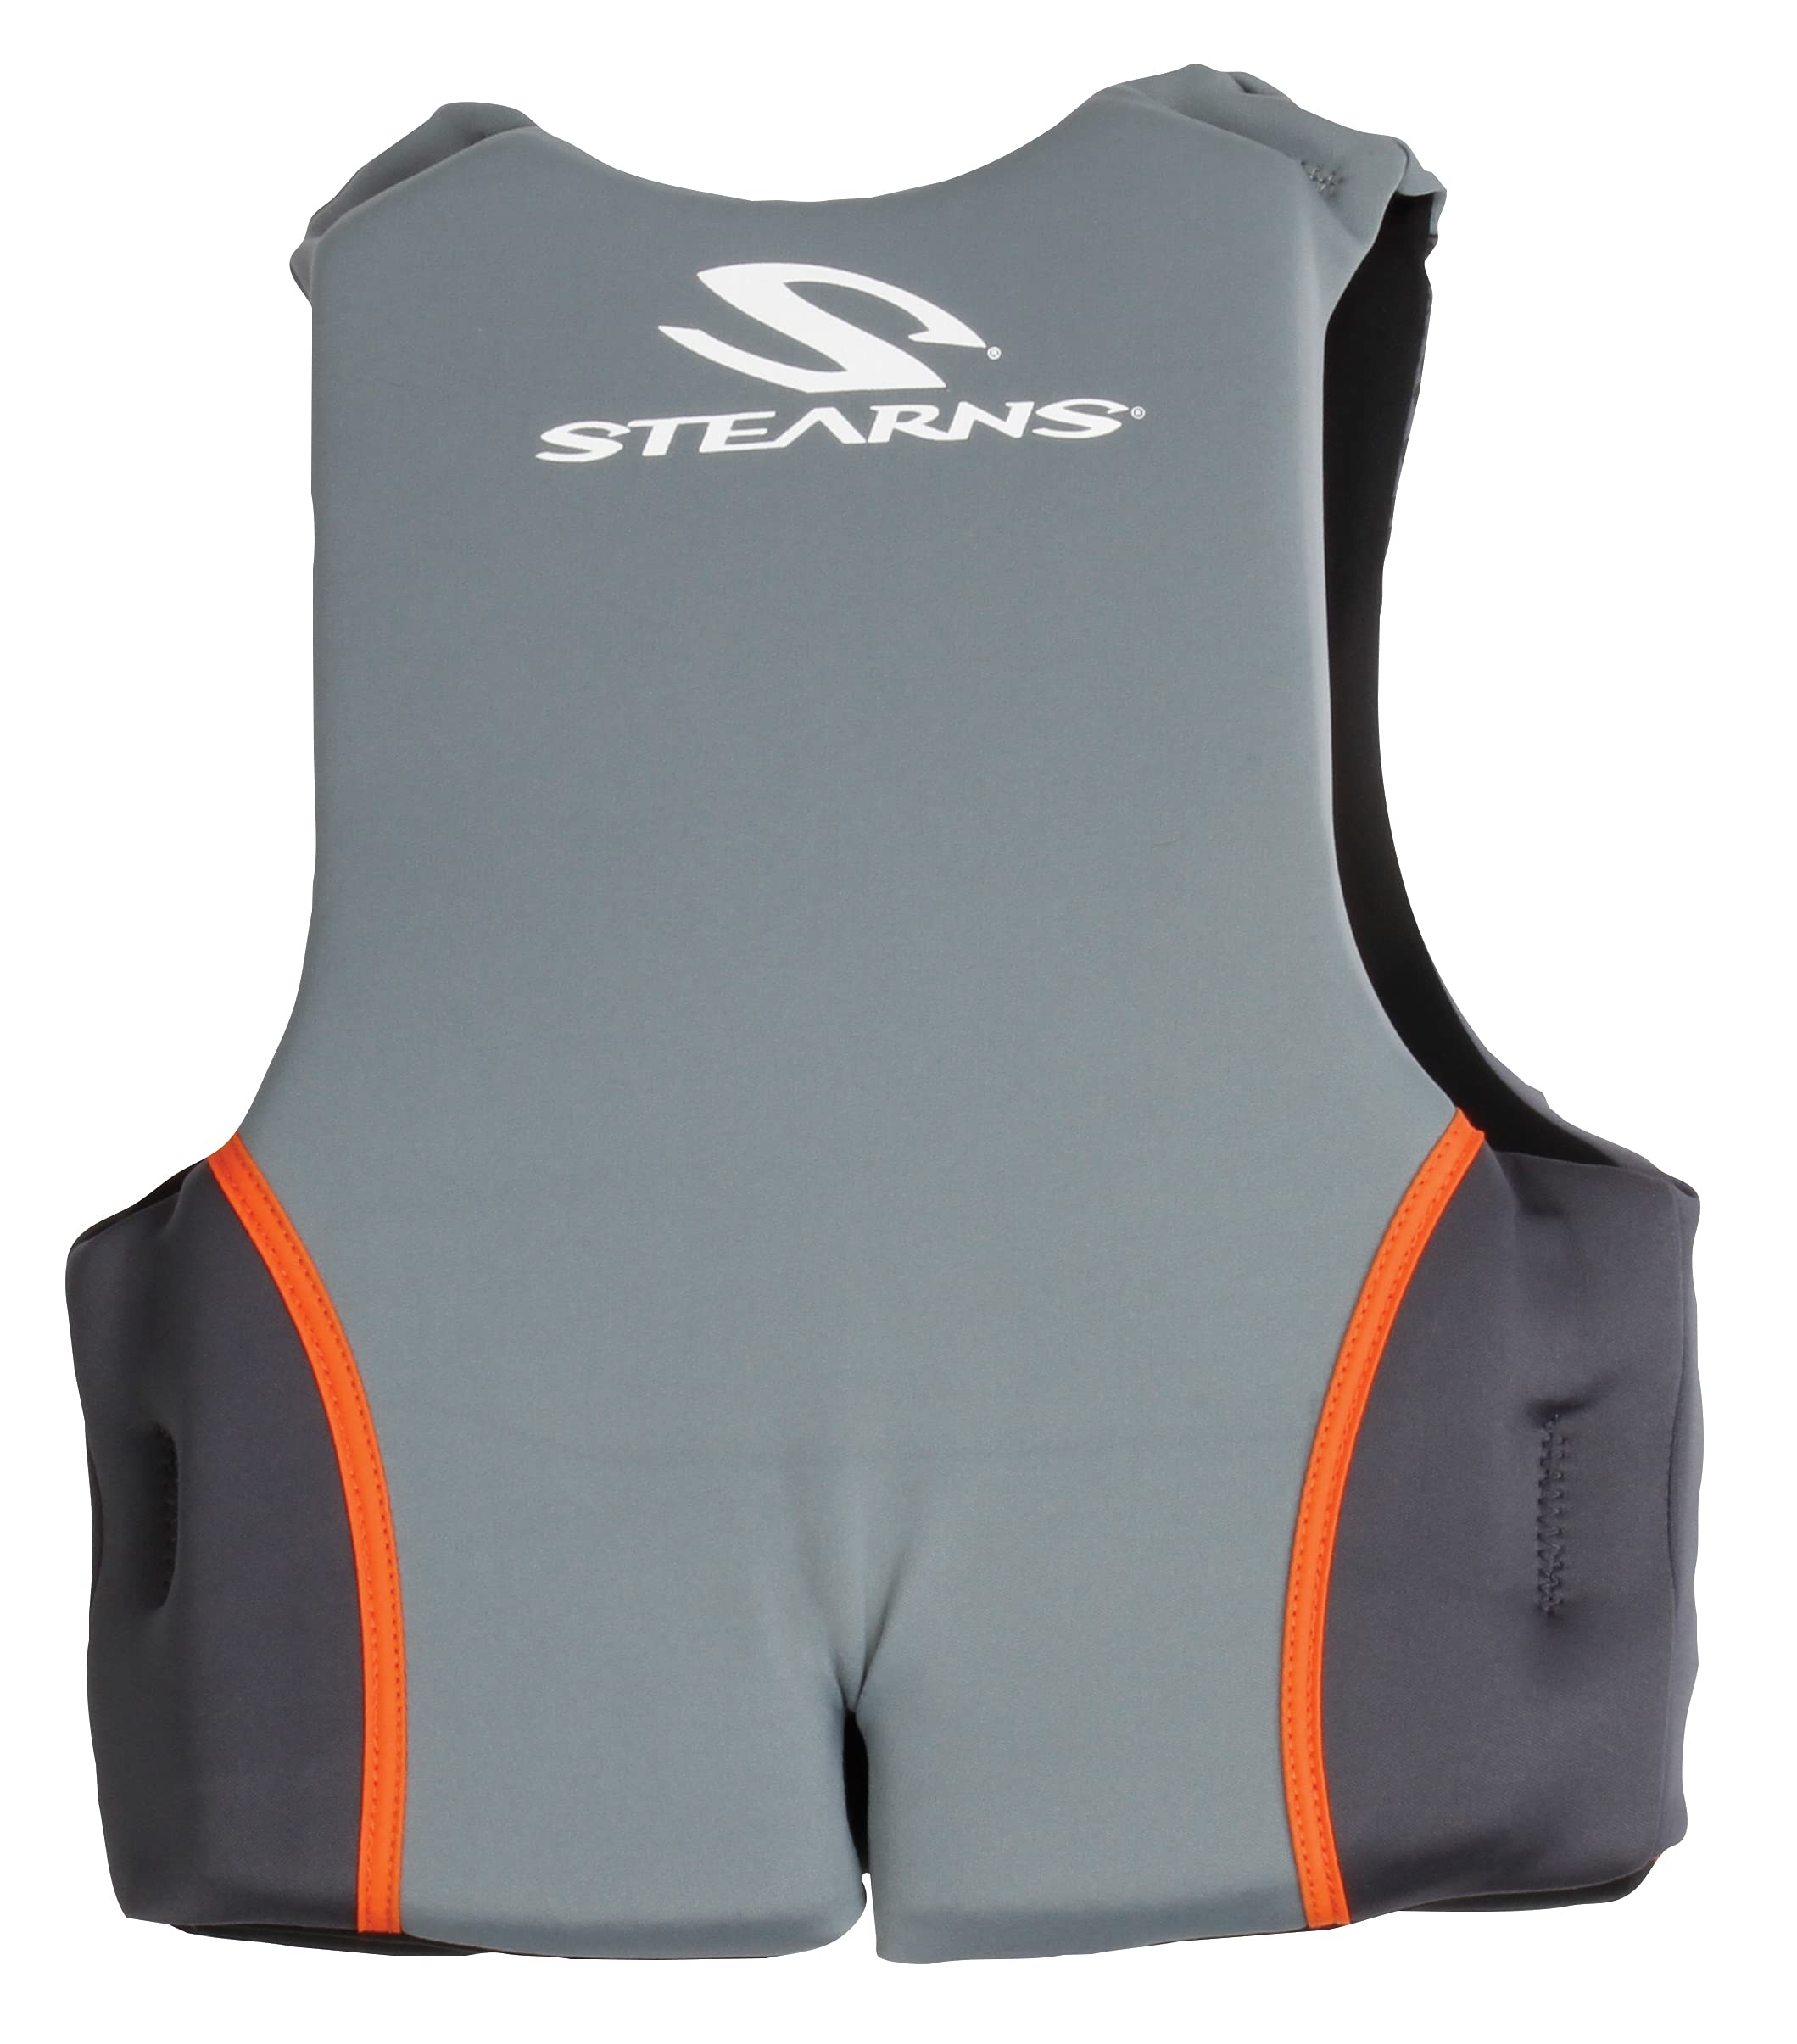 Stearns Kids Hydroprene Life Vest, USCG Approved Type III Life Vest for Kids Weighing 50-90lbs, Great for Pool, Beach, Boat, & More